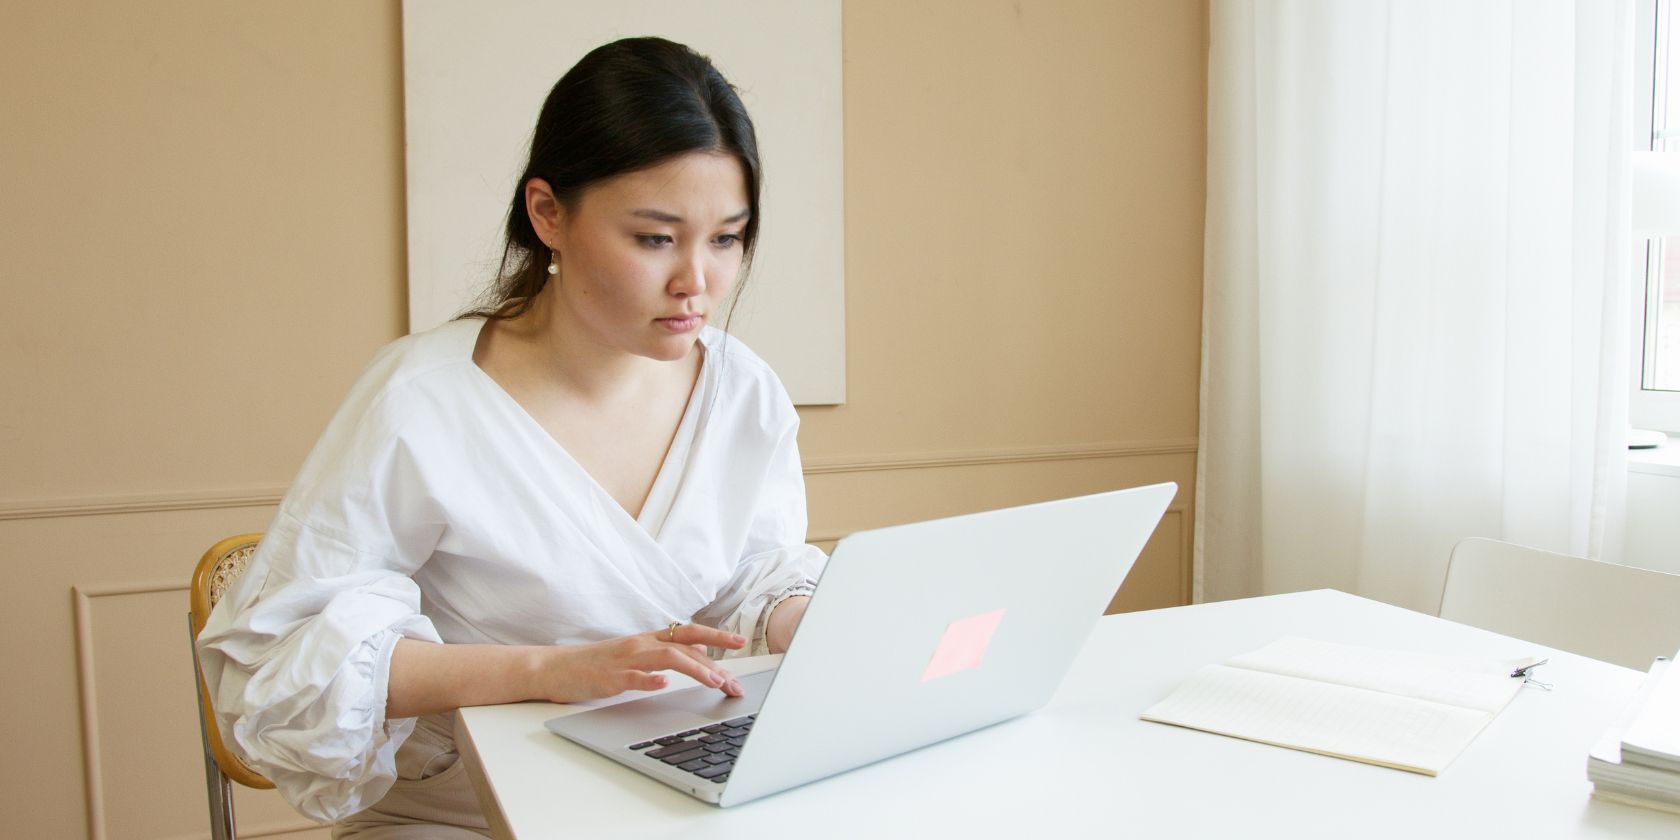 woman wearing a white blouse typing intently on laptop